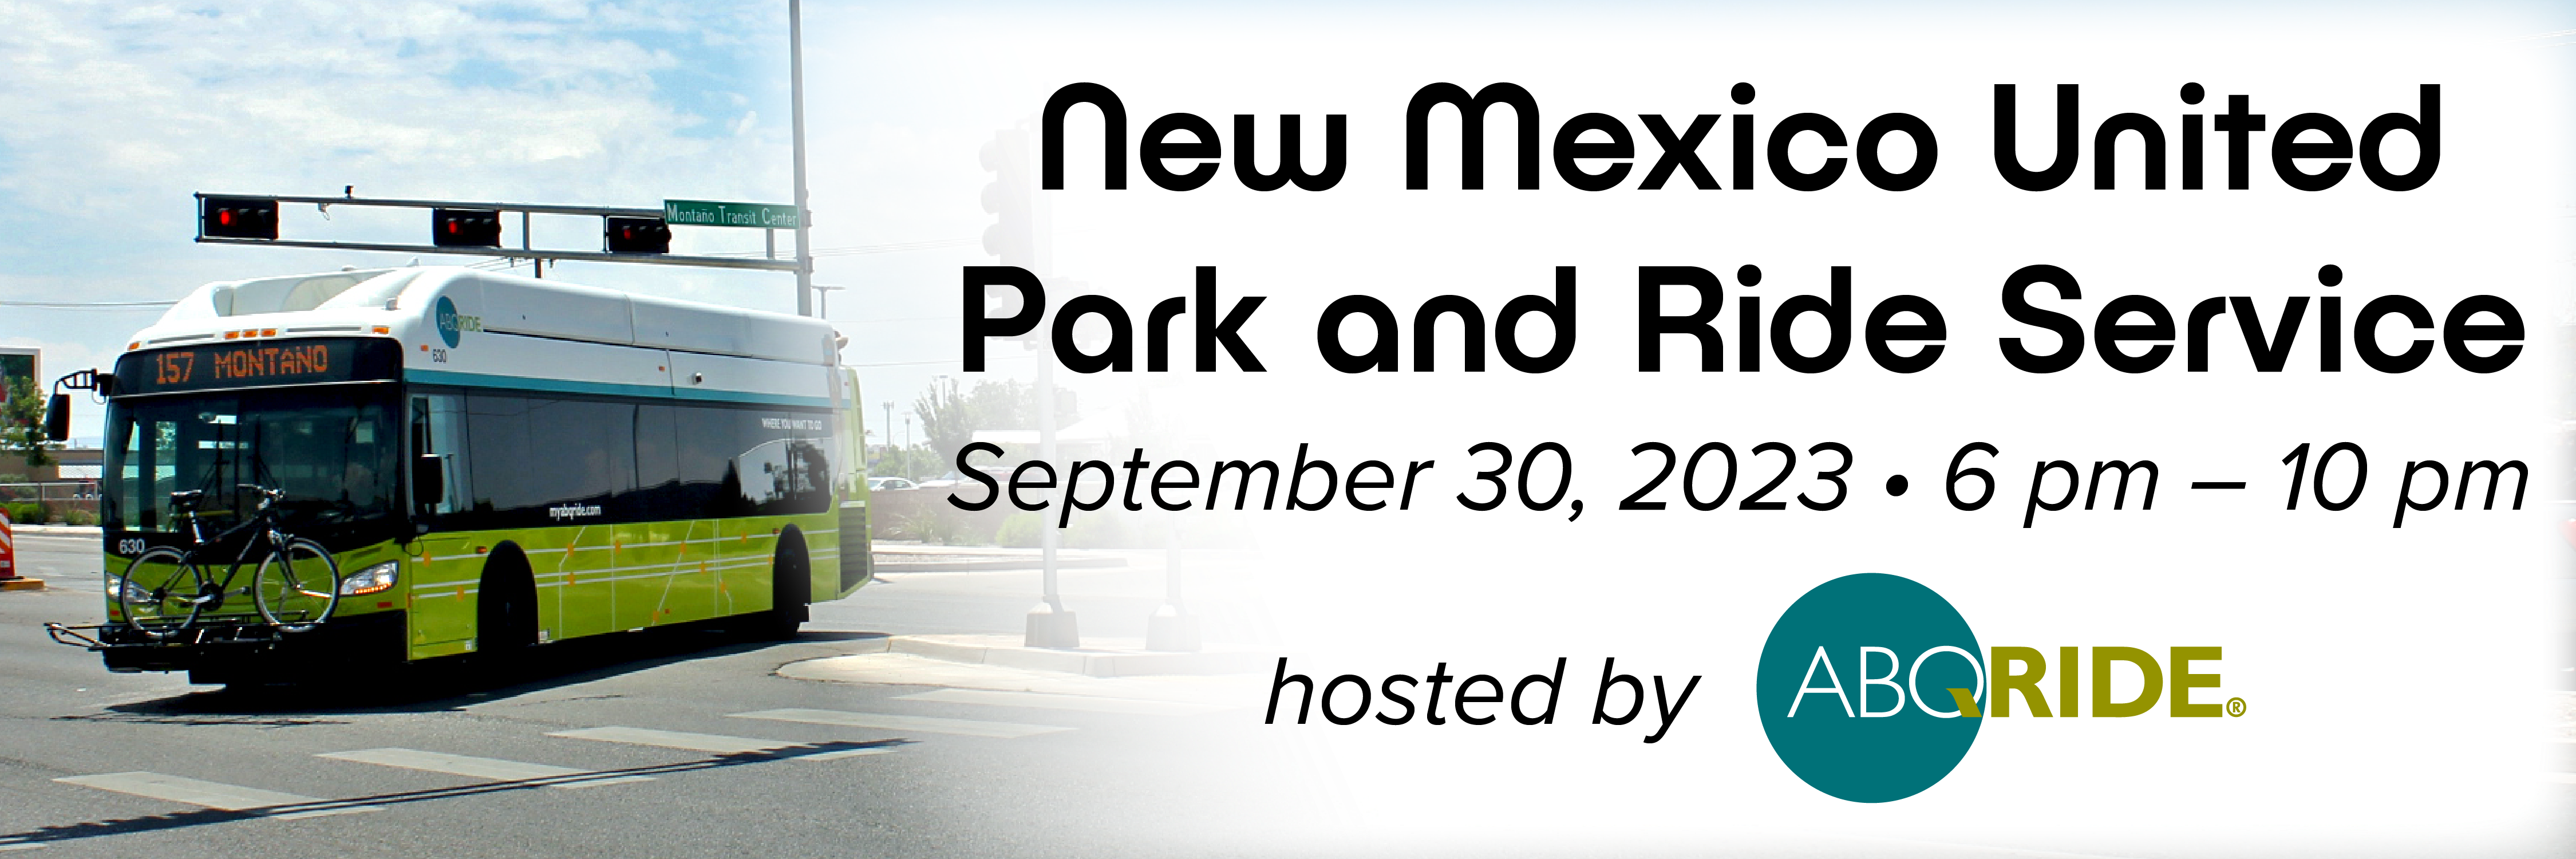 New Mexico United Park and Ride Service